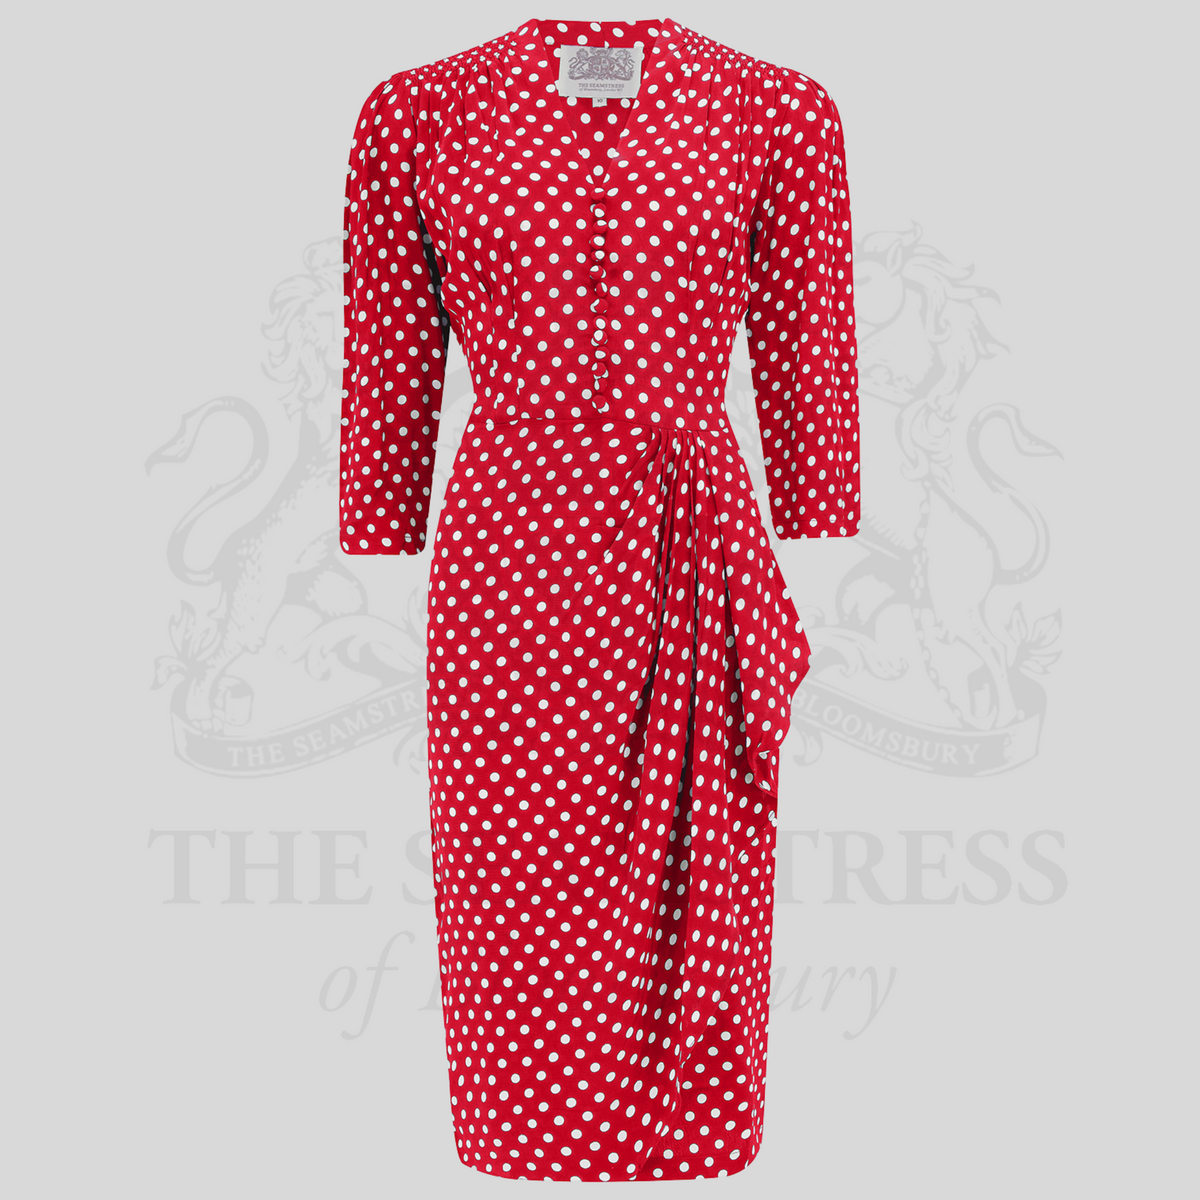 Mabel 3/4 Waterfall Dress in Red Polka